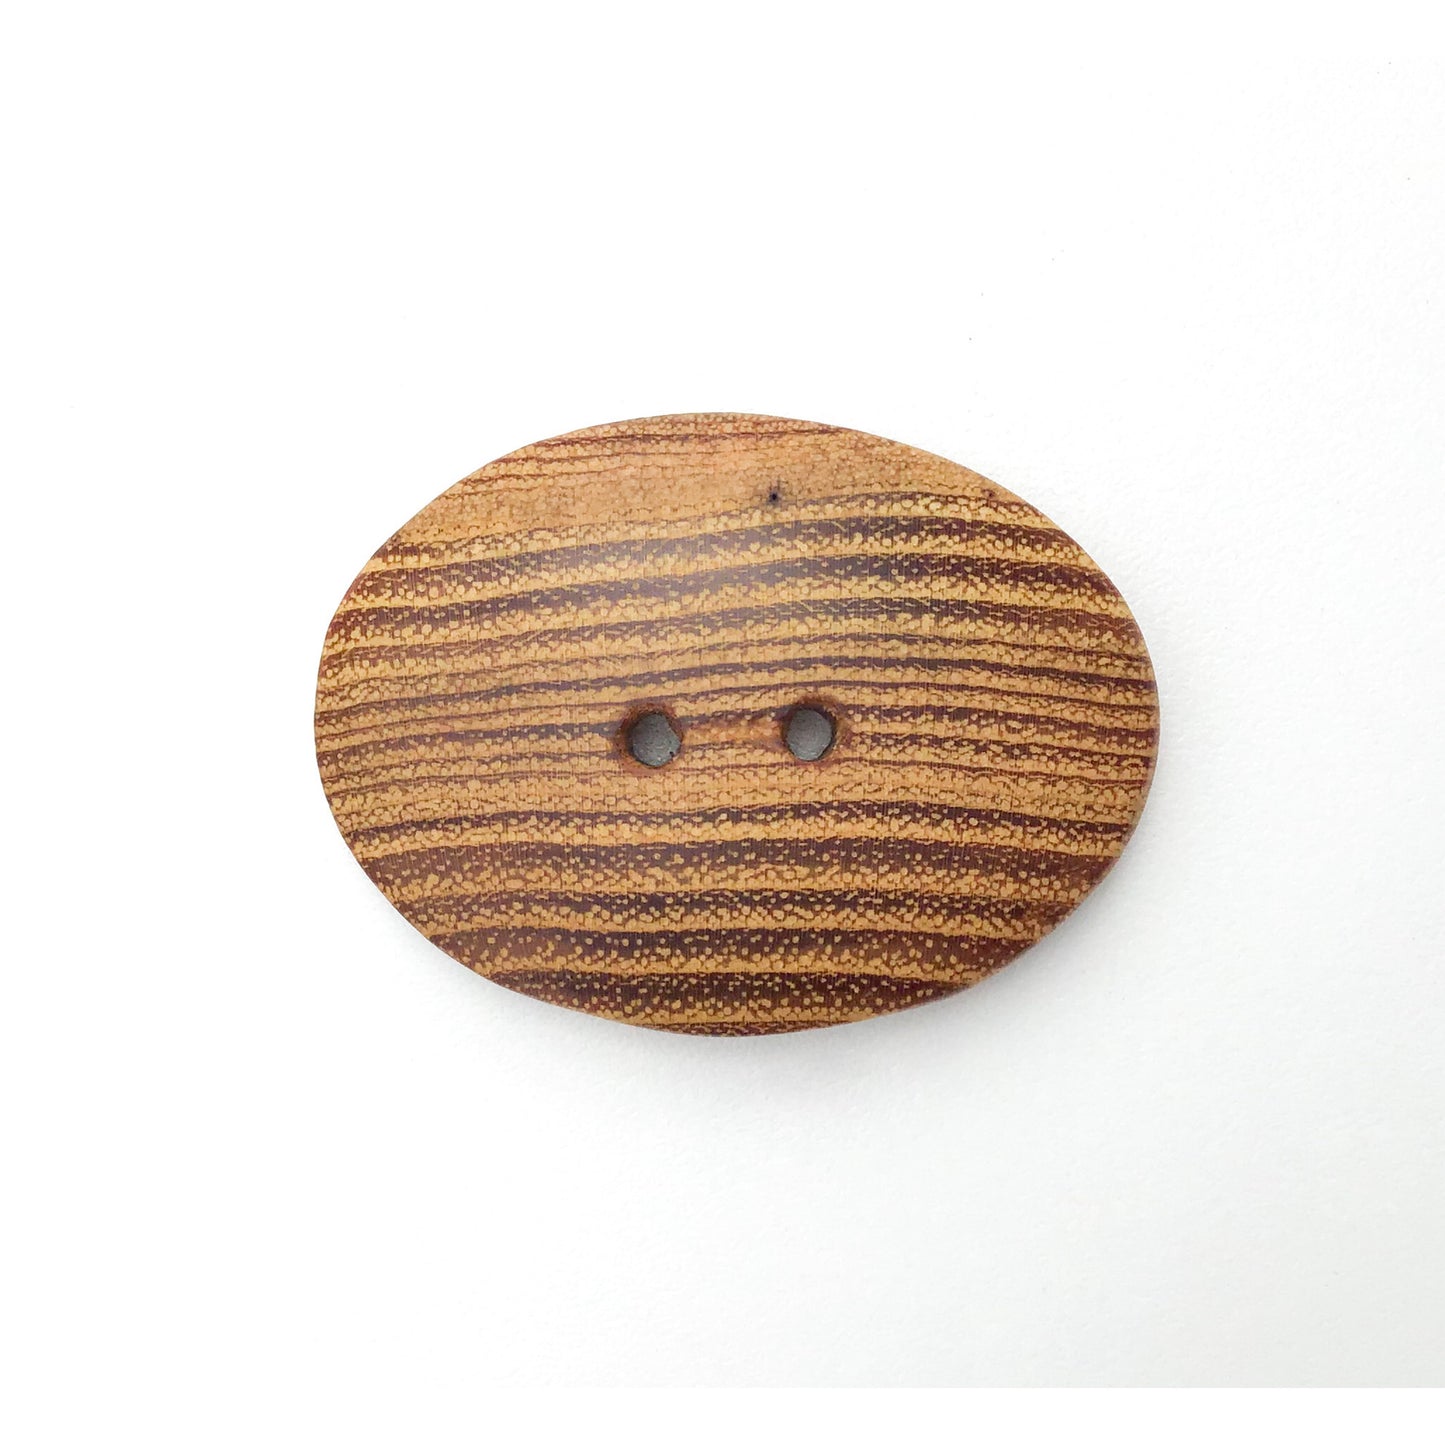 Oval Black Locust Wood Buttons - Large Wooden Button - 1 1/2" x 2"